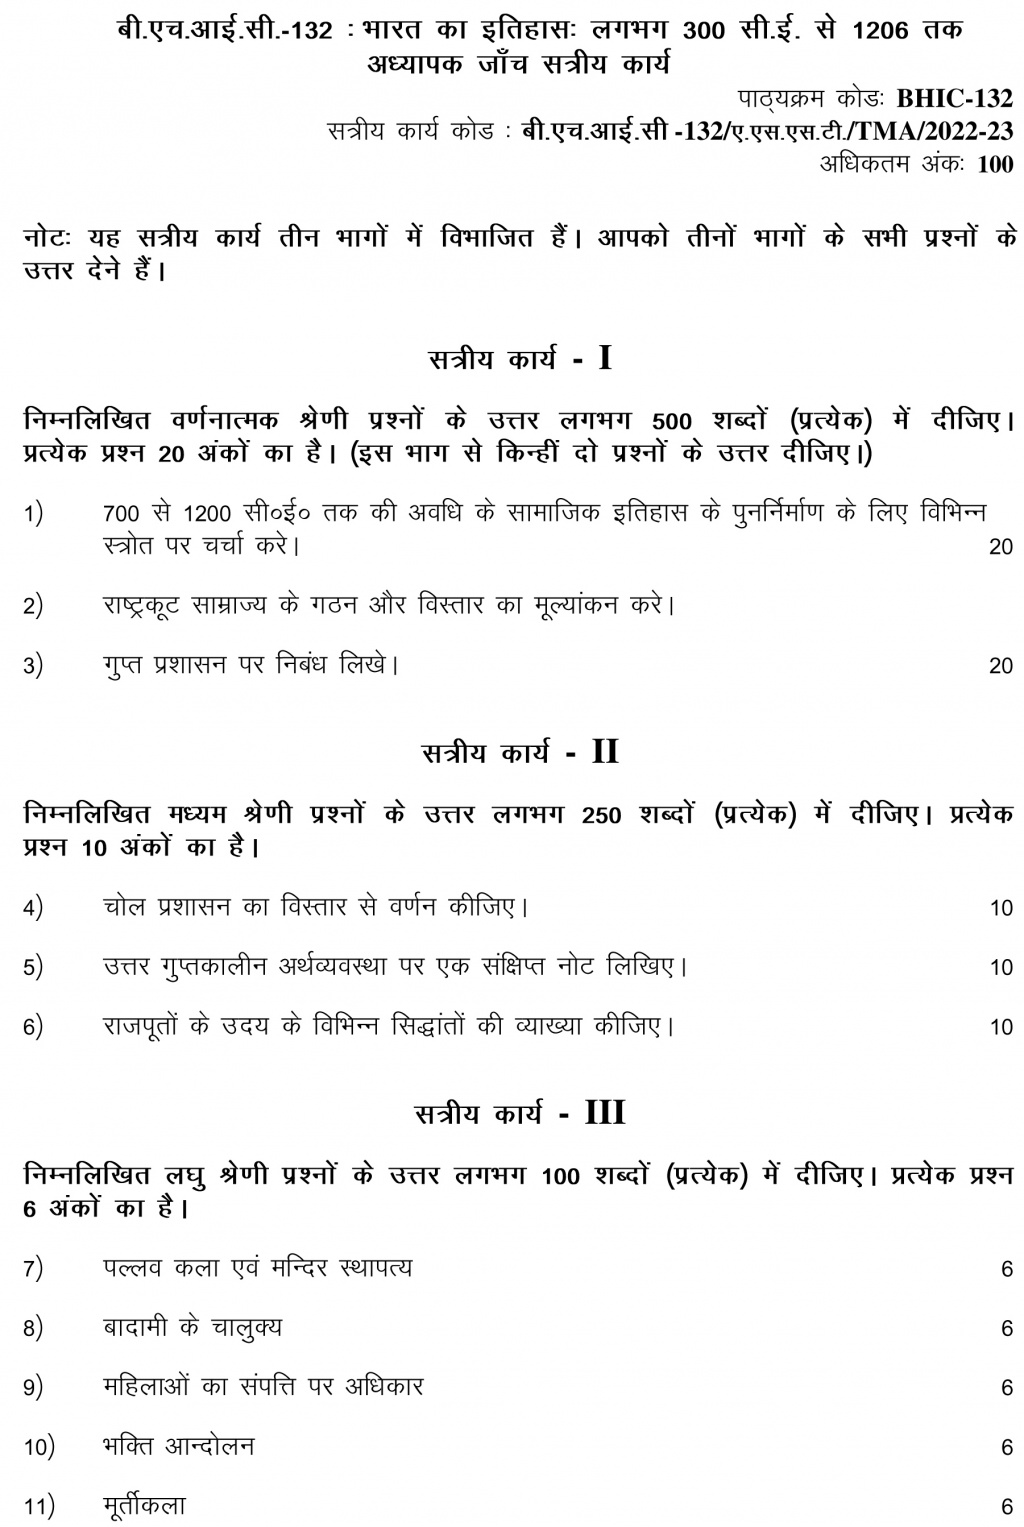 IGNOU BHIC-132 - History of India from C. 300-1206 Latest Solved Assignment-July 2022 – January 2023